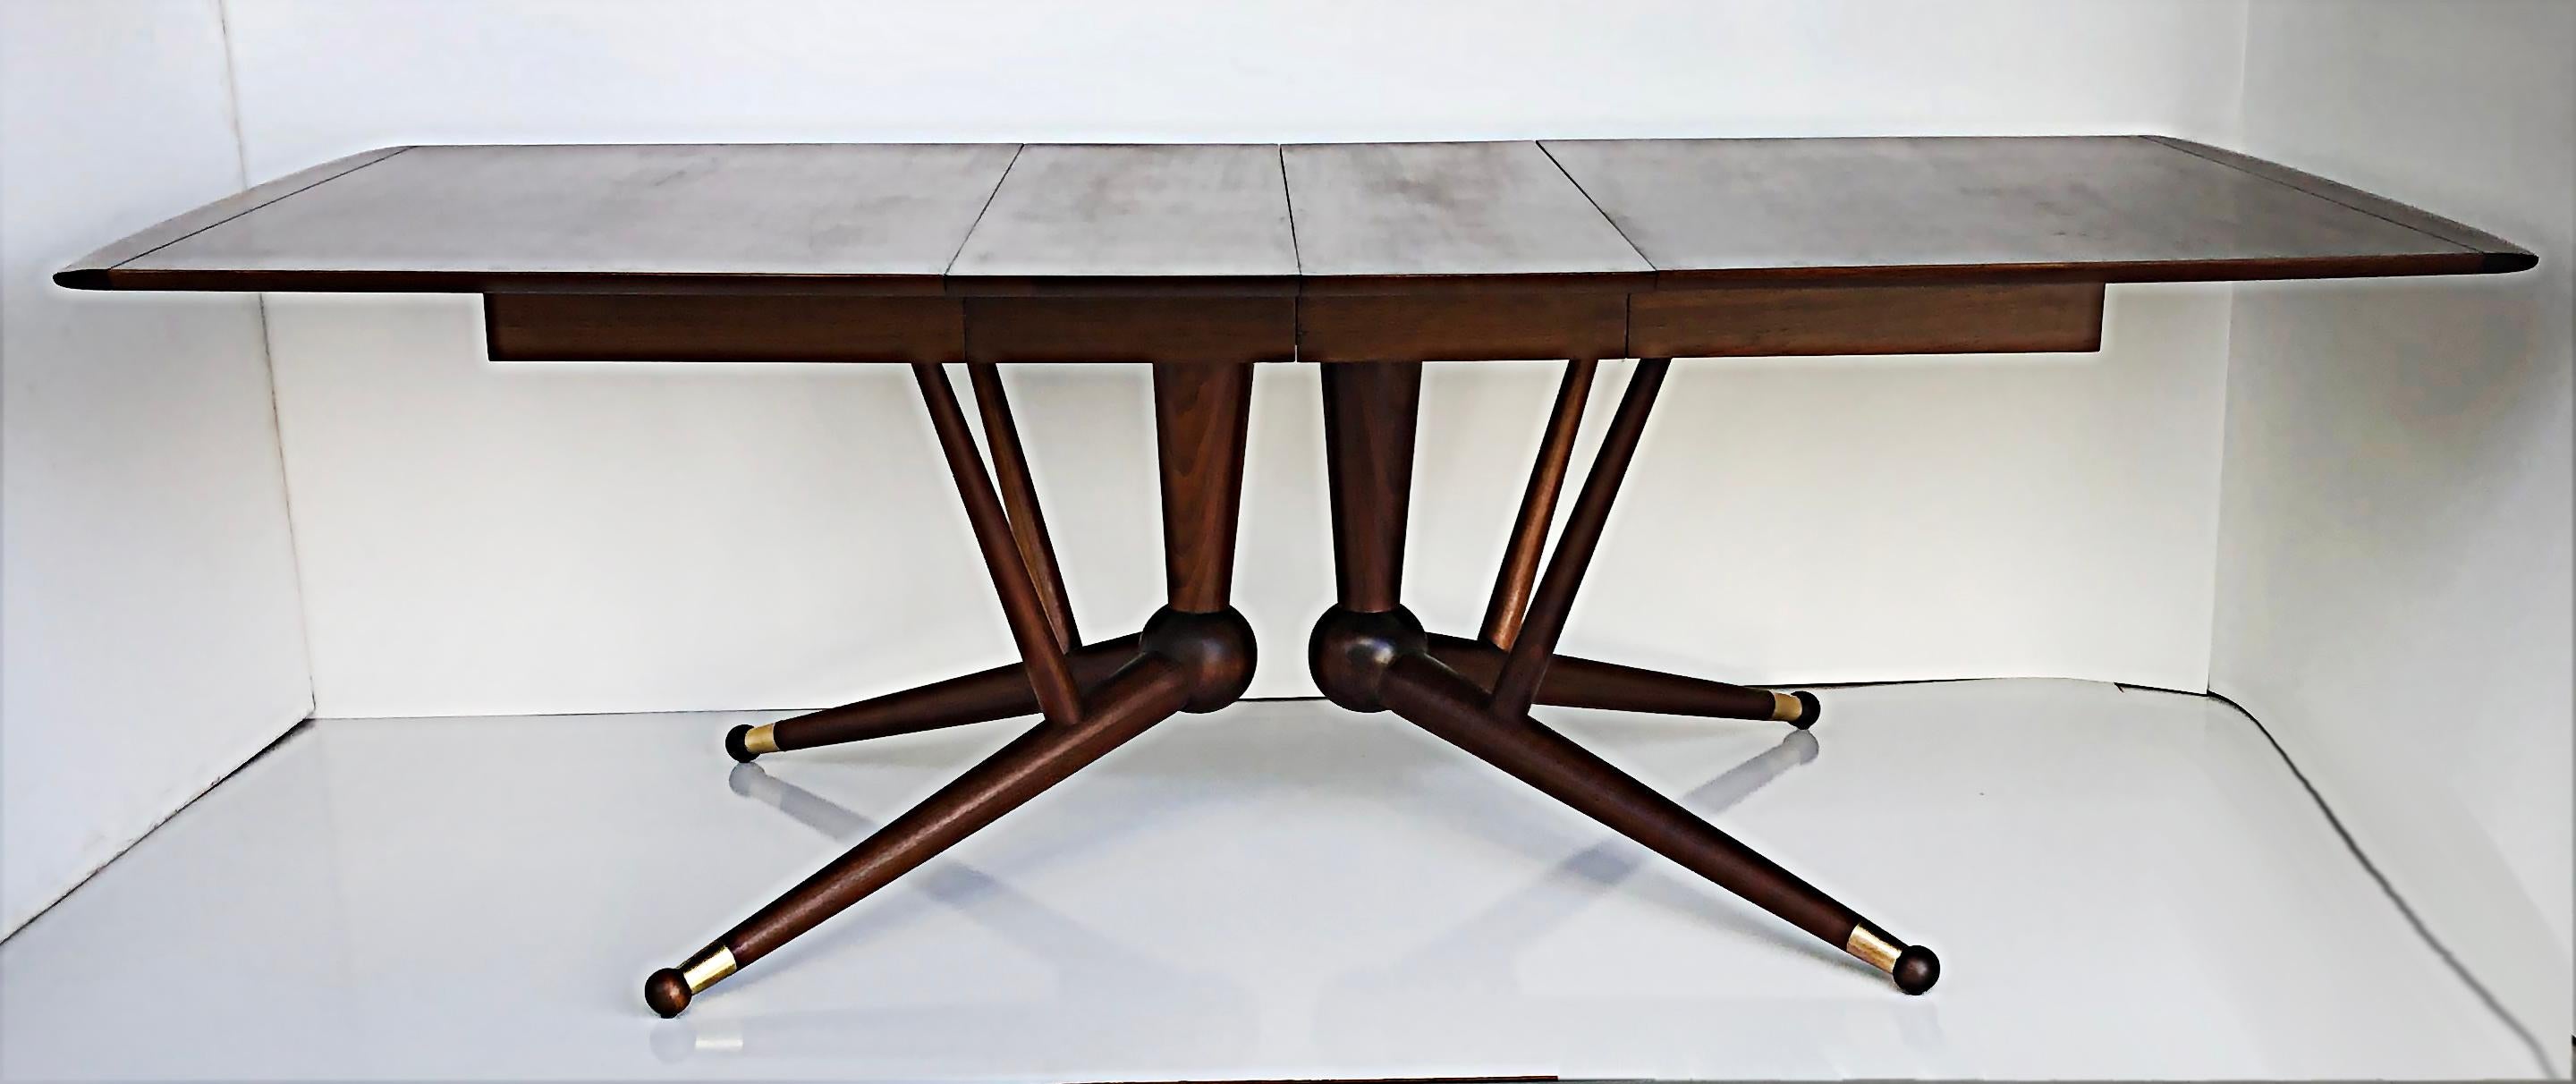 American Mid-century Modernist Expandable dining table with Two Wood Leaves

Offered for sale is a recently restored American mid-century modern solid wood expandable dining table with two leaves and banded brass wood legs. The width of each leaf